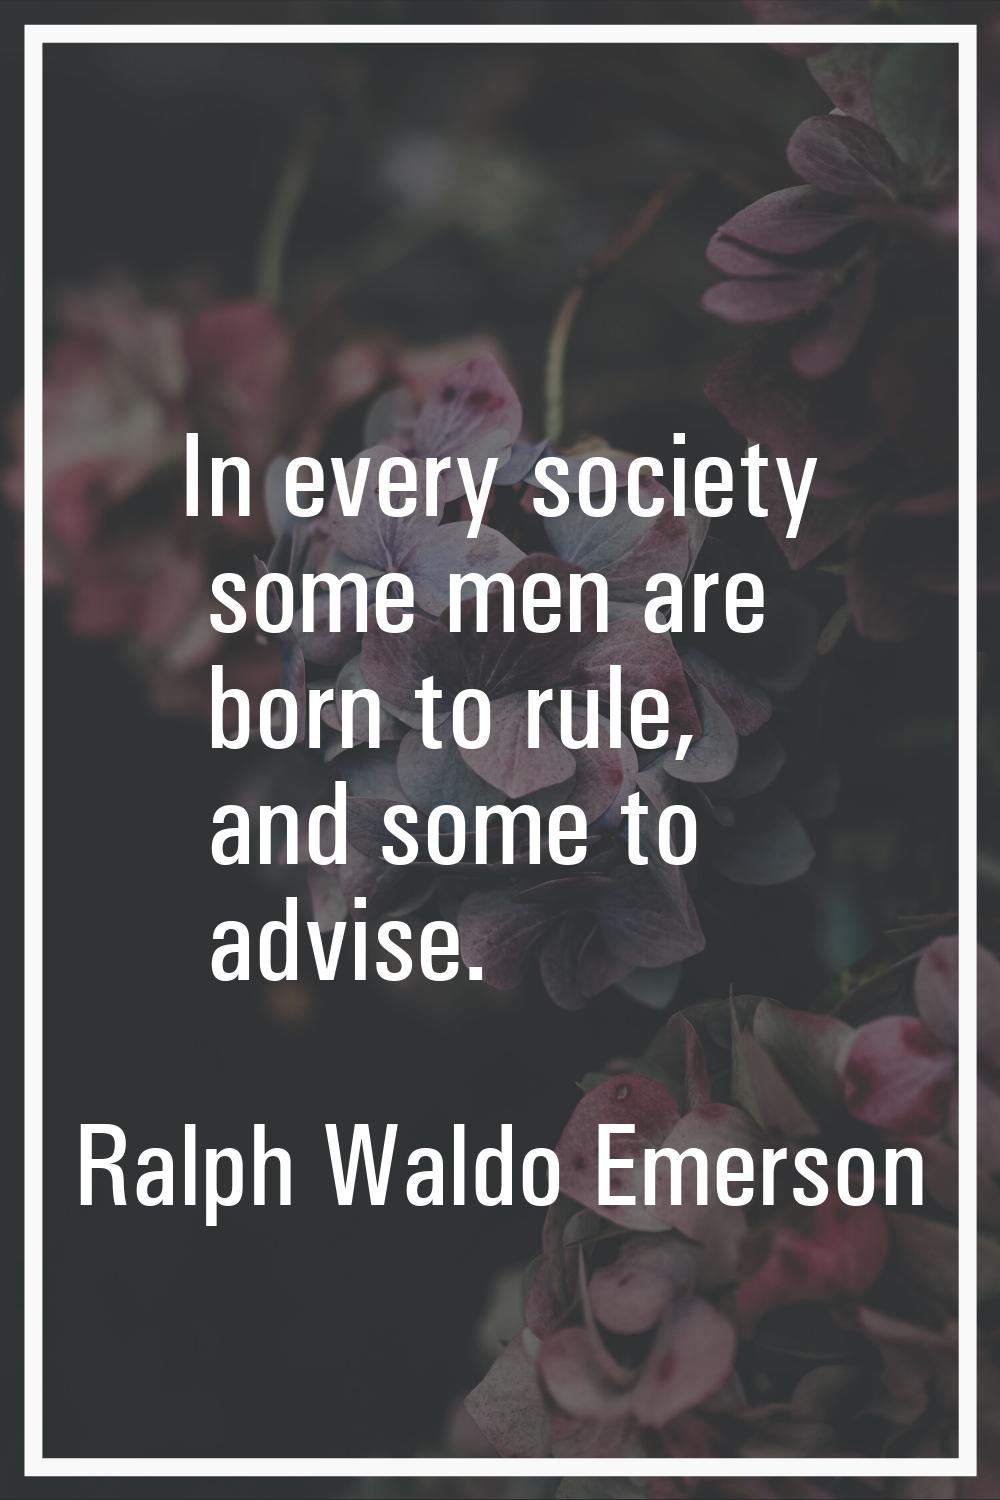 In every society some men are born to rule, and some to advise.